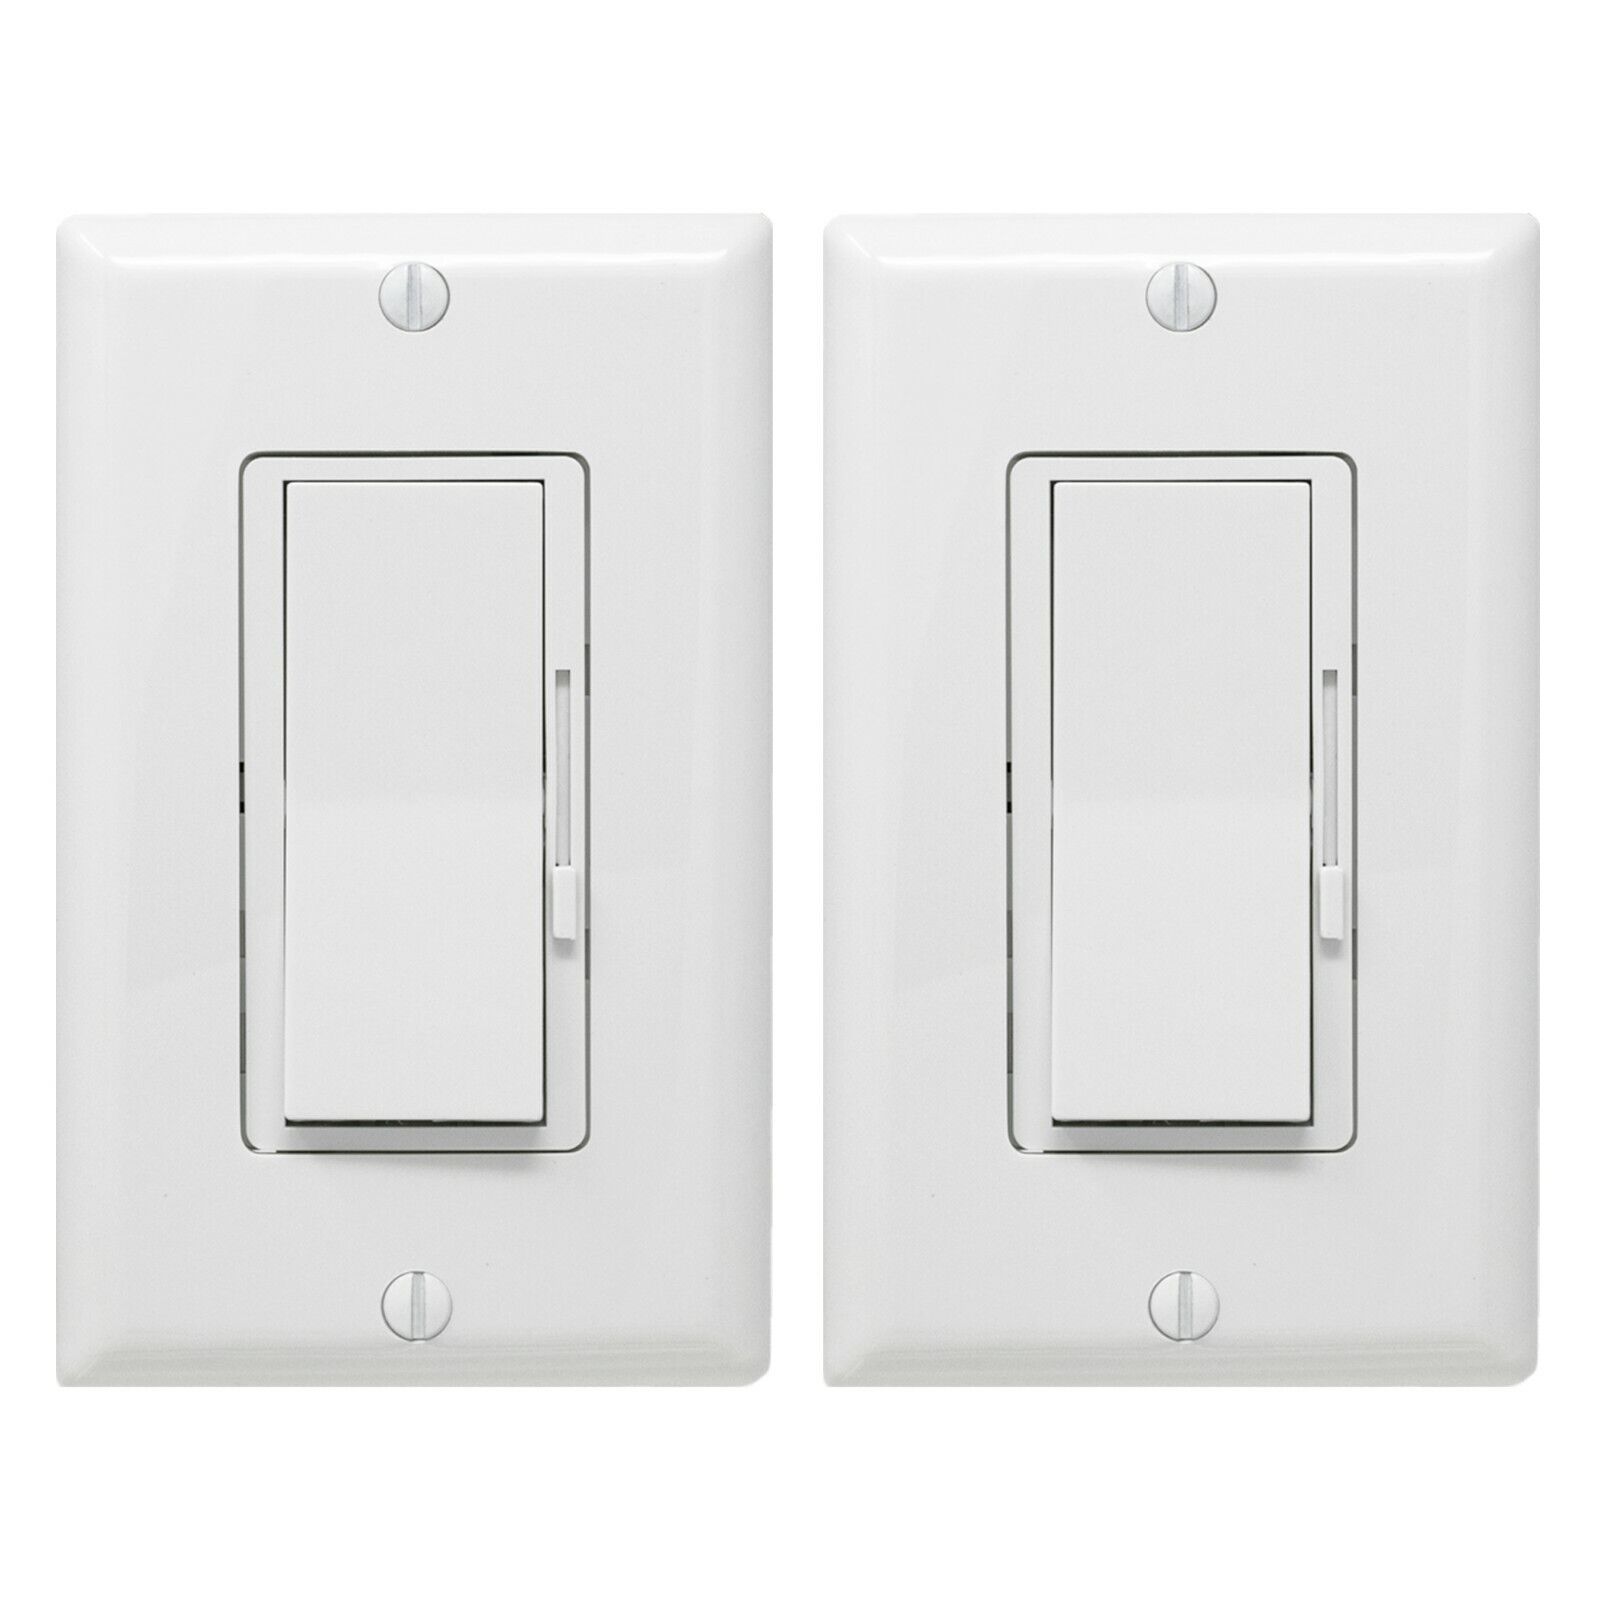 [2-Pack] Dimmer Light Switch- Single Pole or 3-Way for LED /Incandescent/ CFL McFadden Electric VX-DM-D3W-W